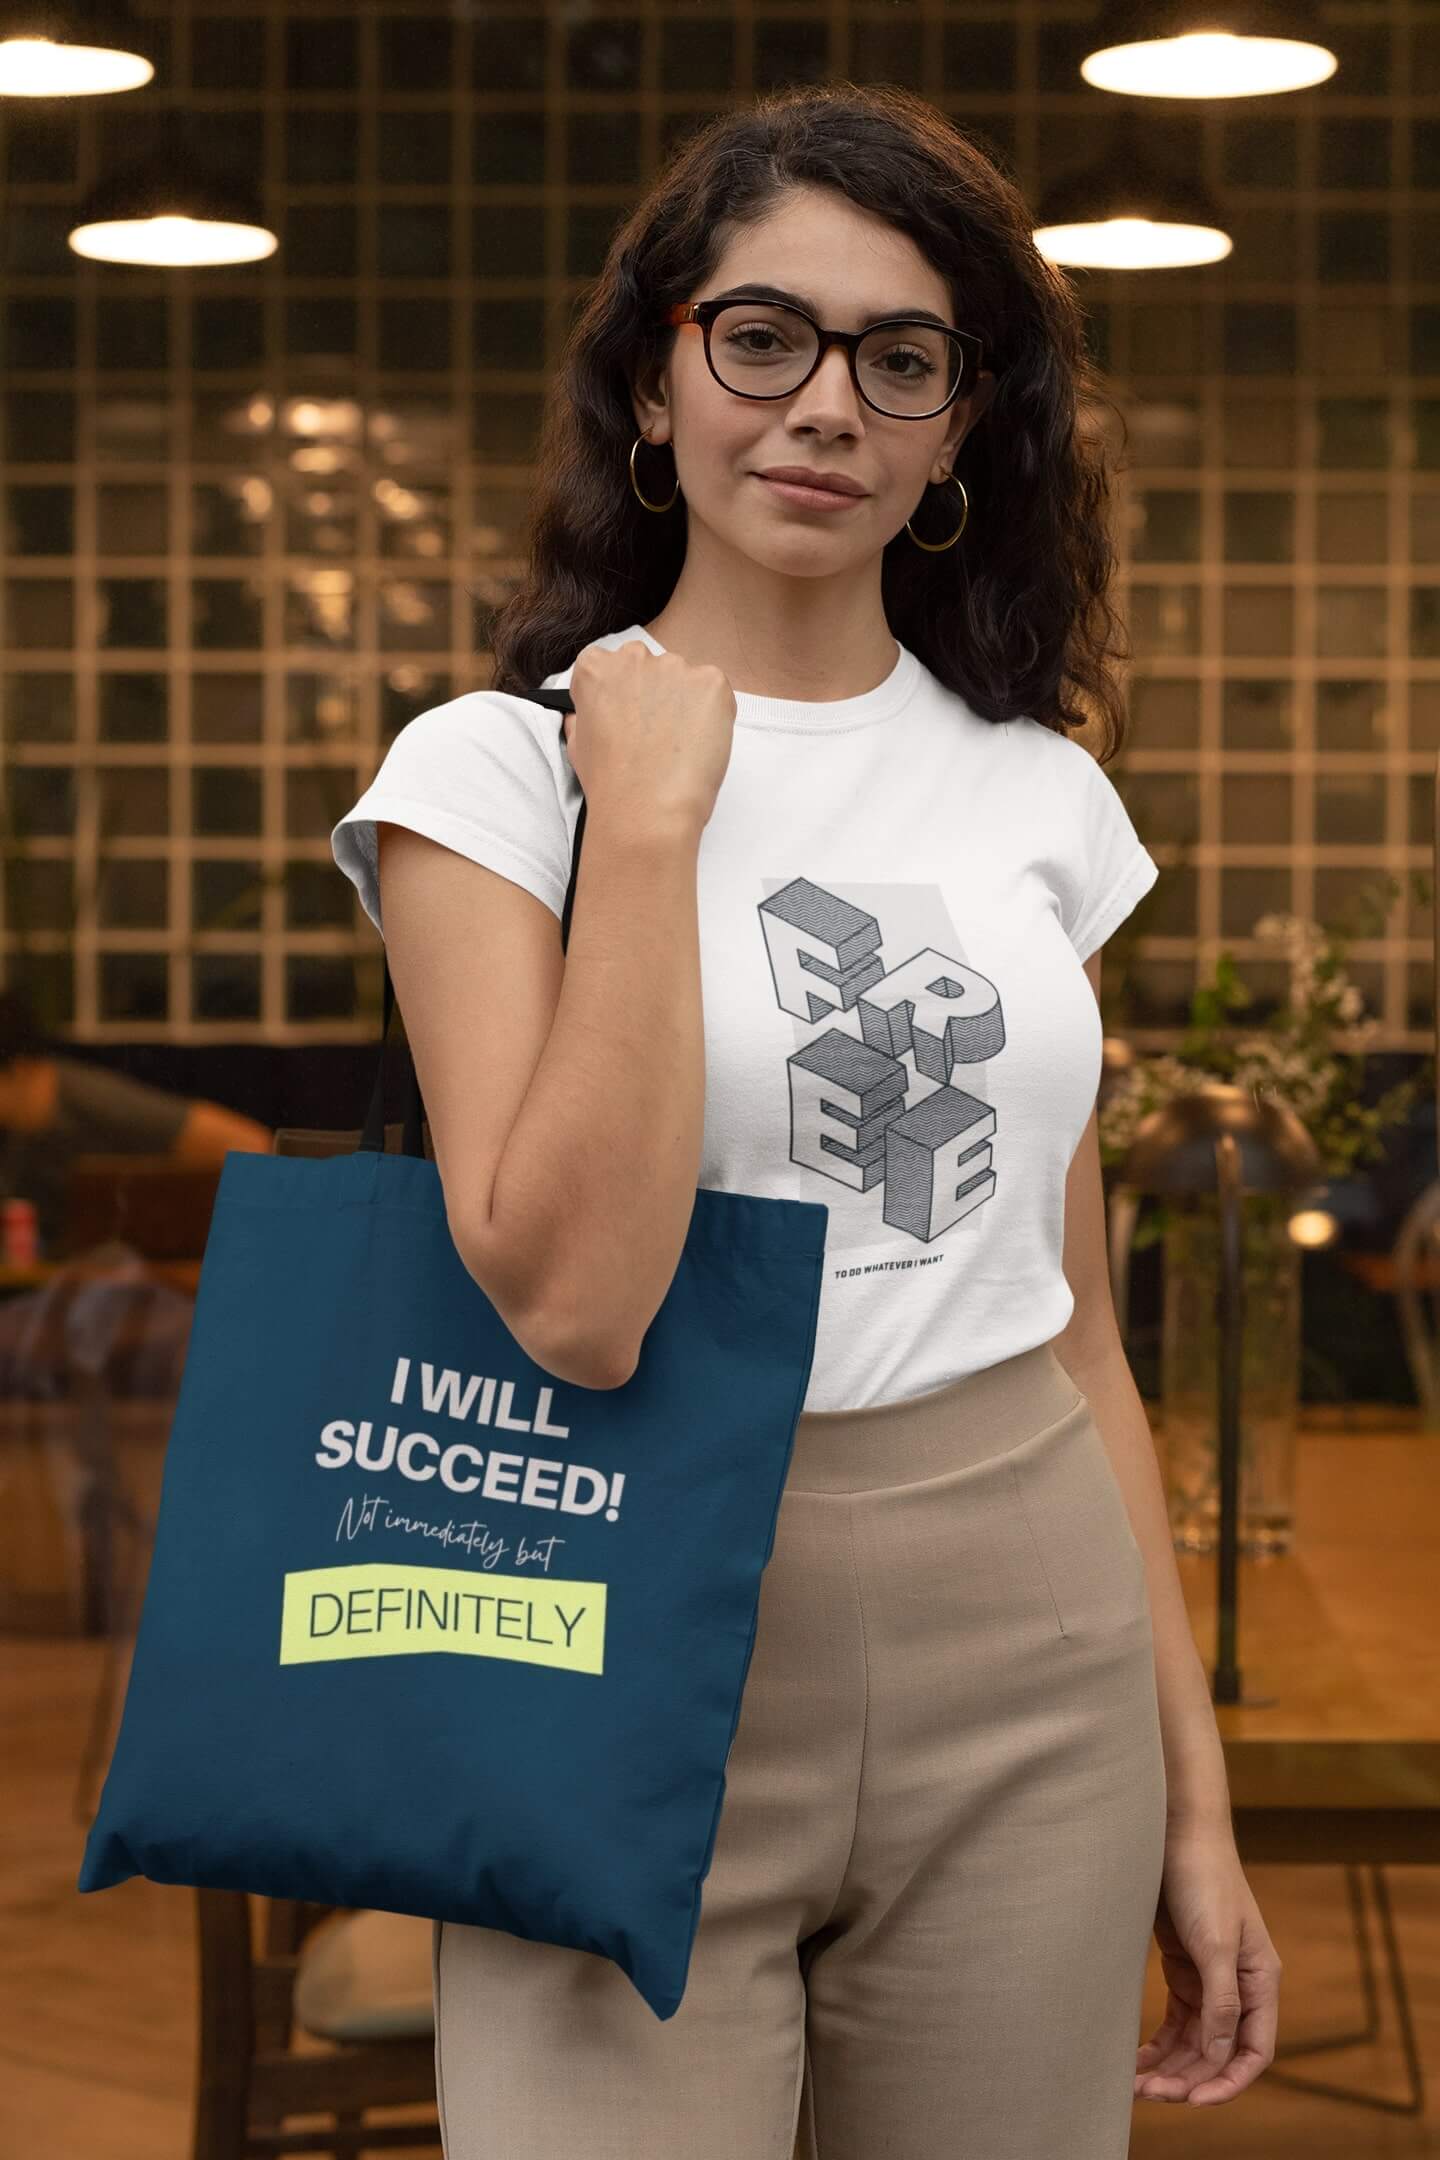 Woman wearing business tote bag and shirt